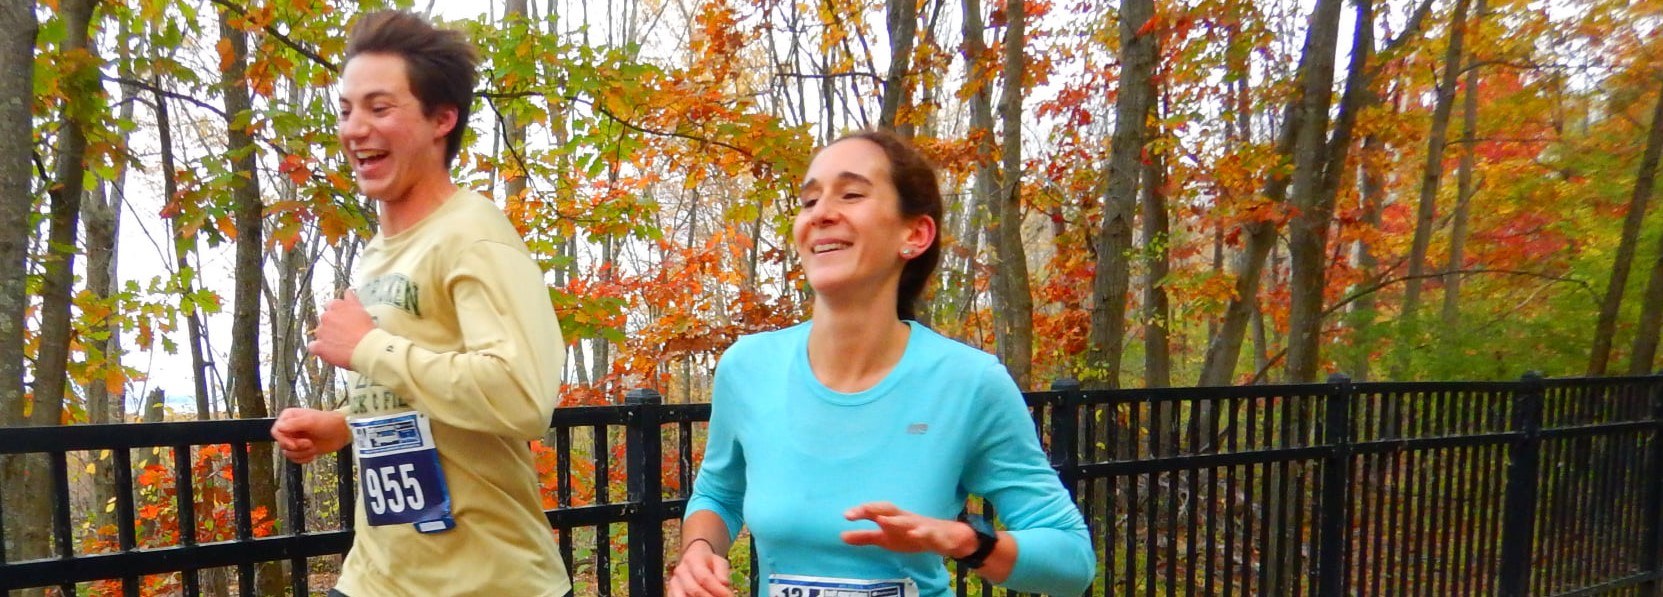 two smiling runners in the fall